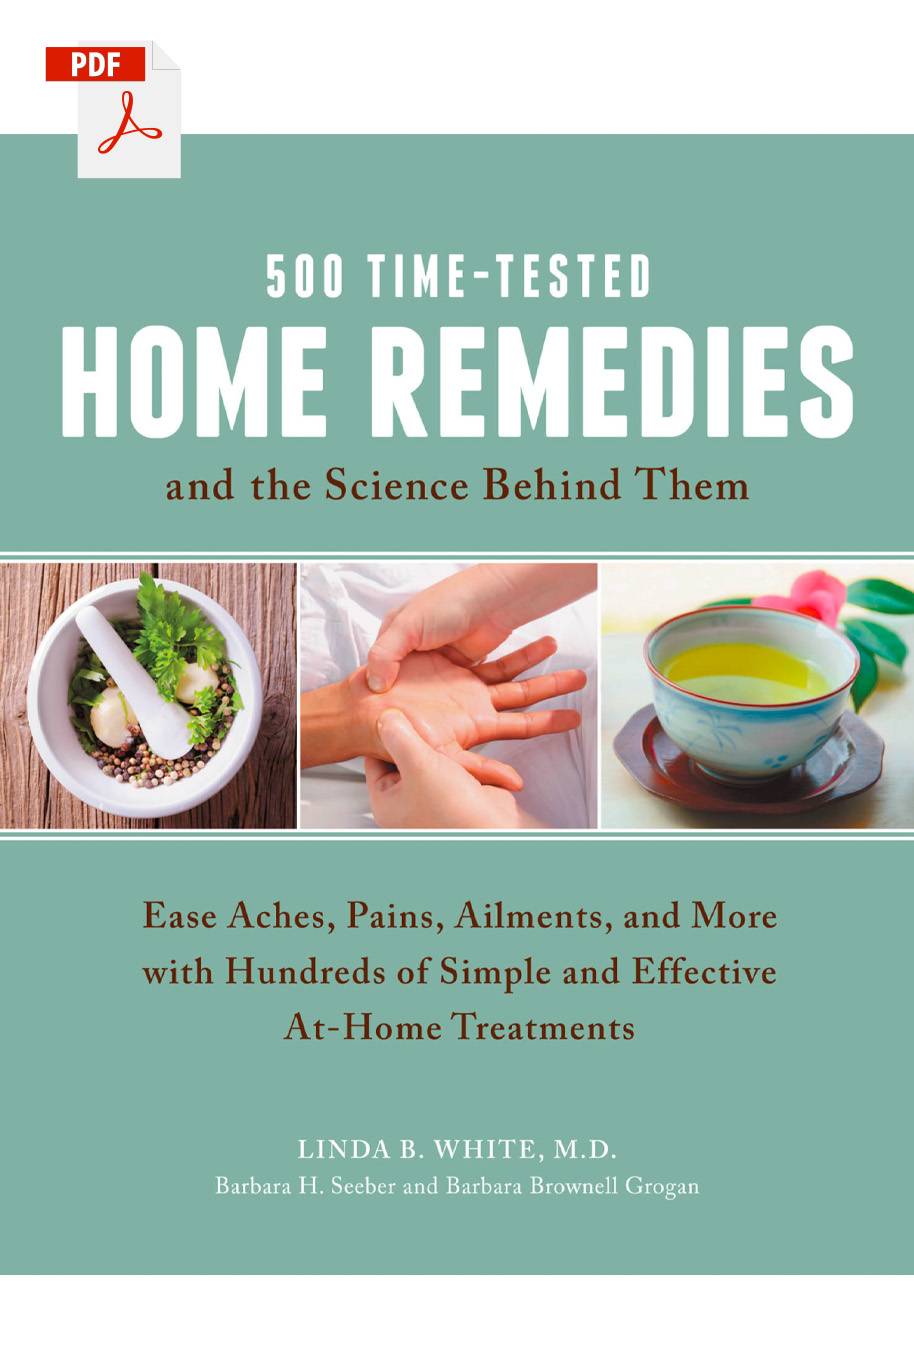 500 Time Tested Home Remedies - 514 pages